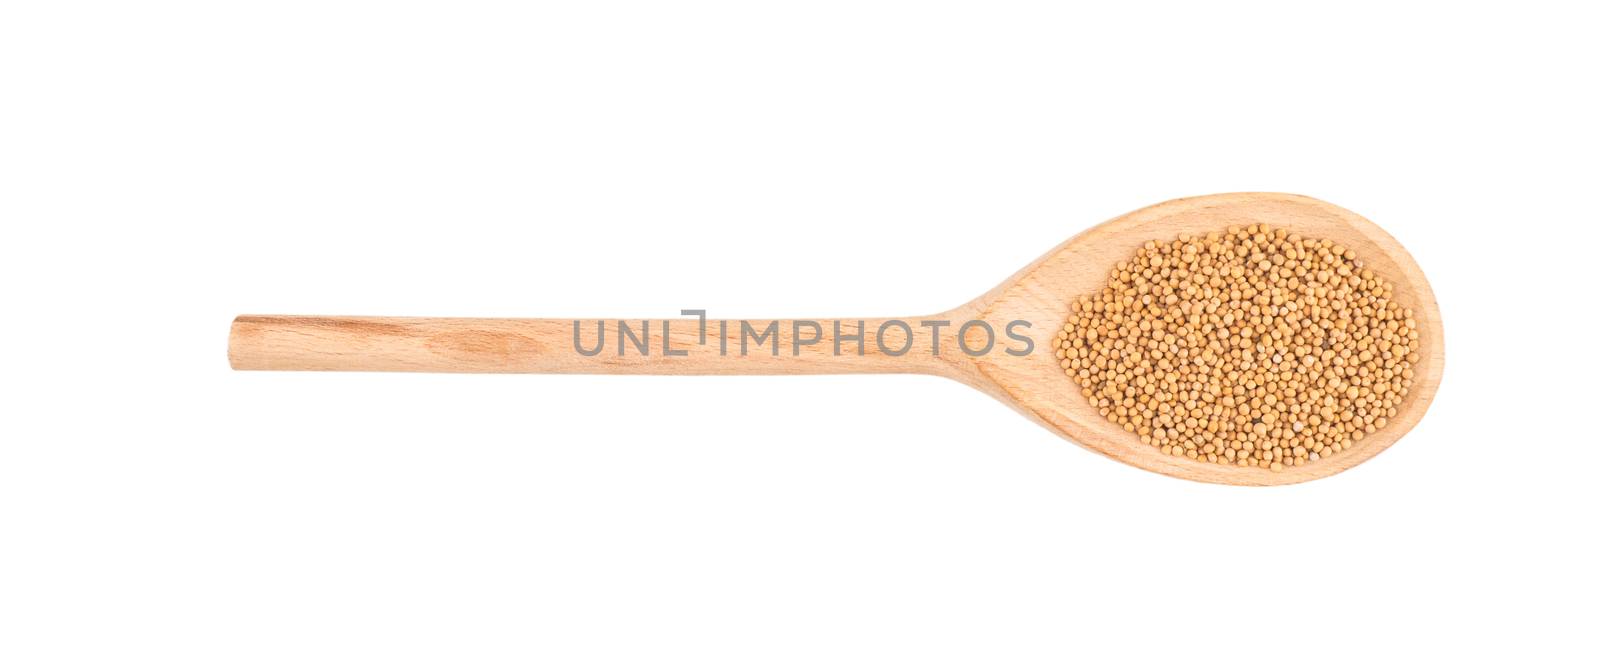 Mustard seeds in wooden scoop over white background by DGolbay